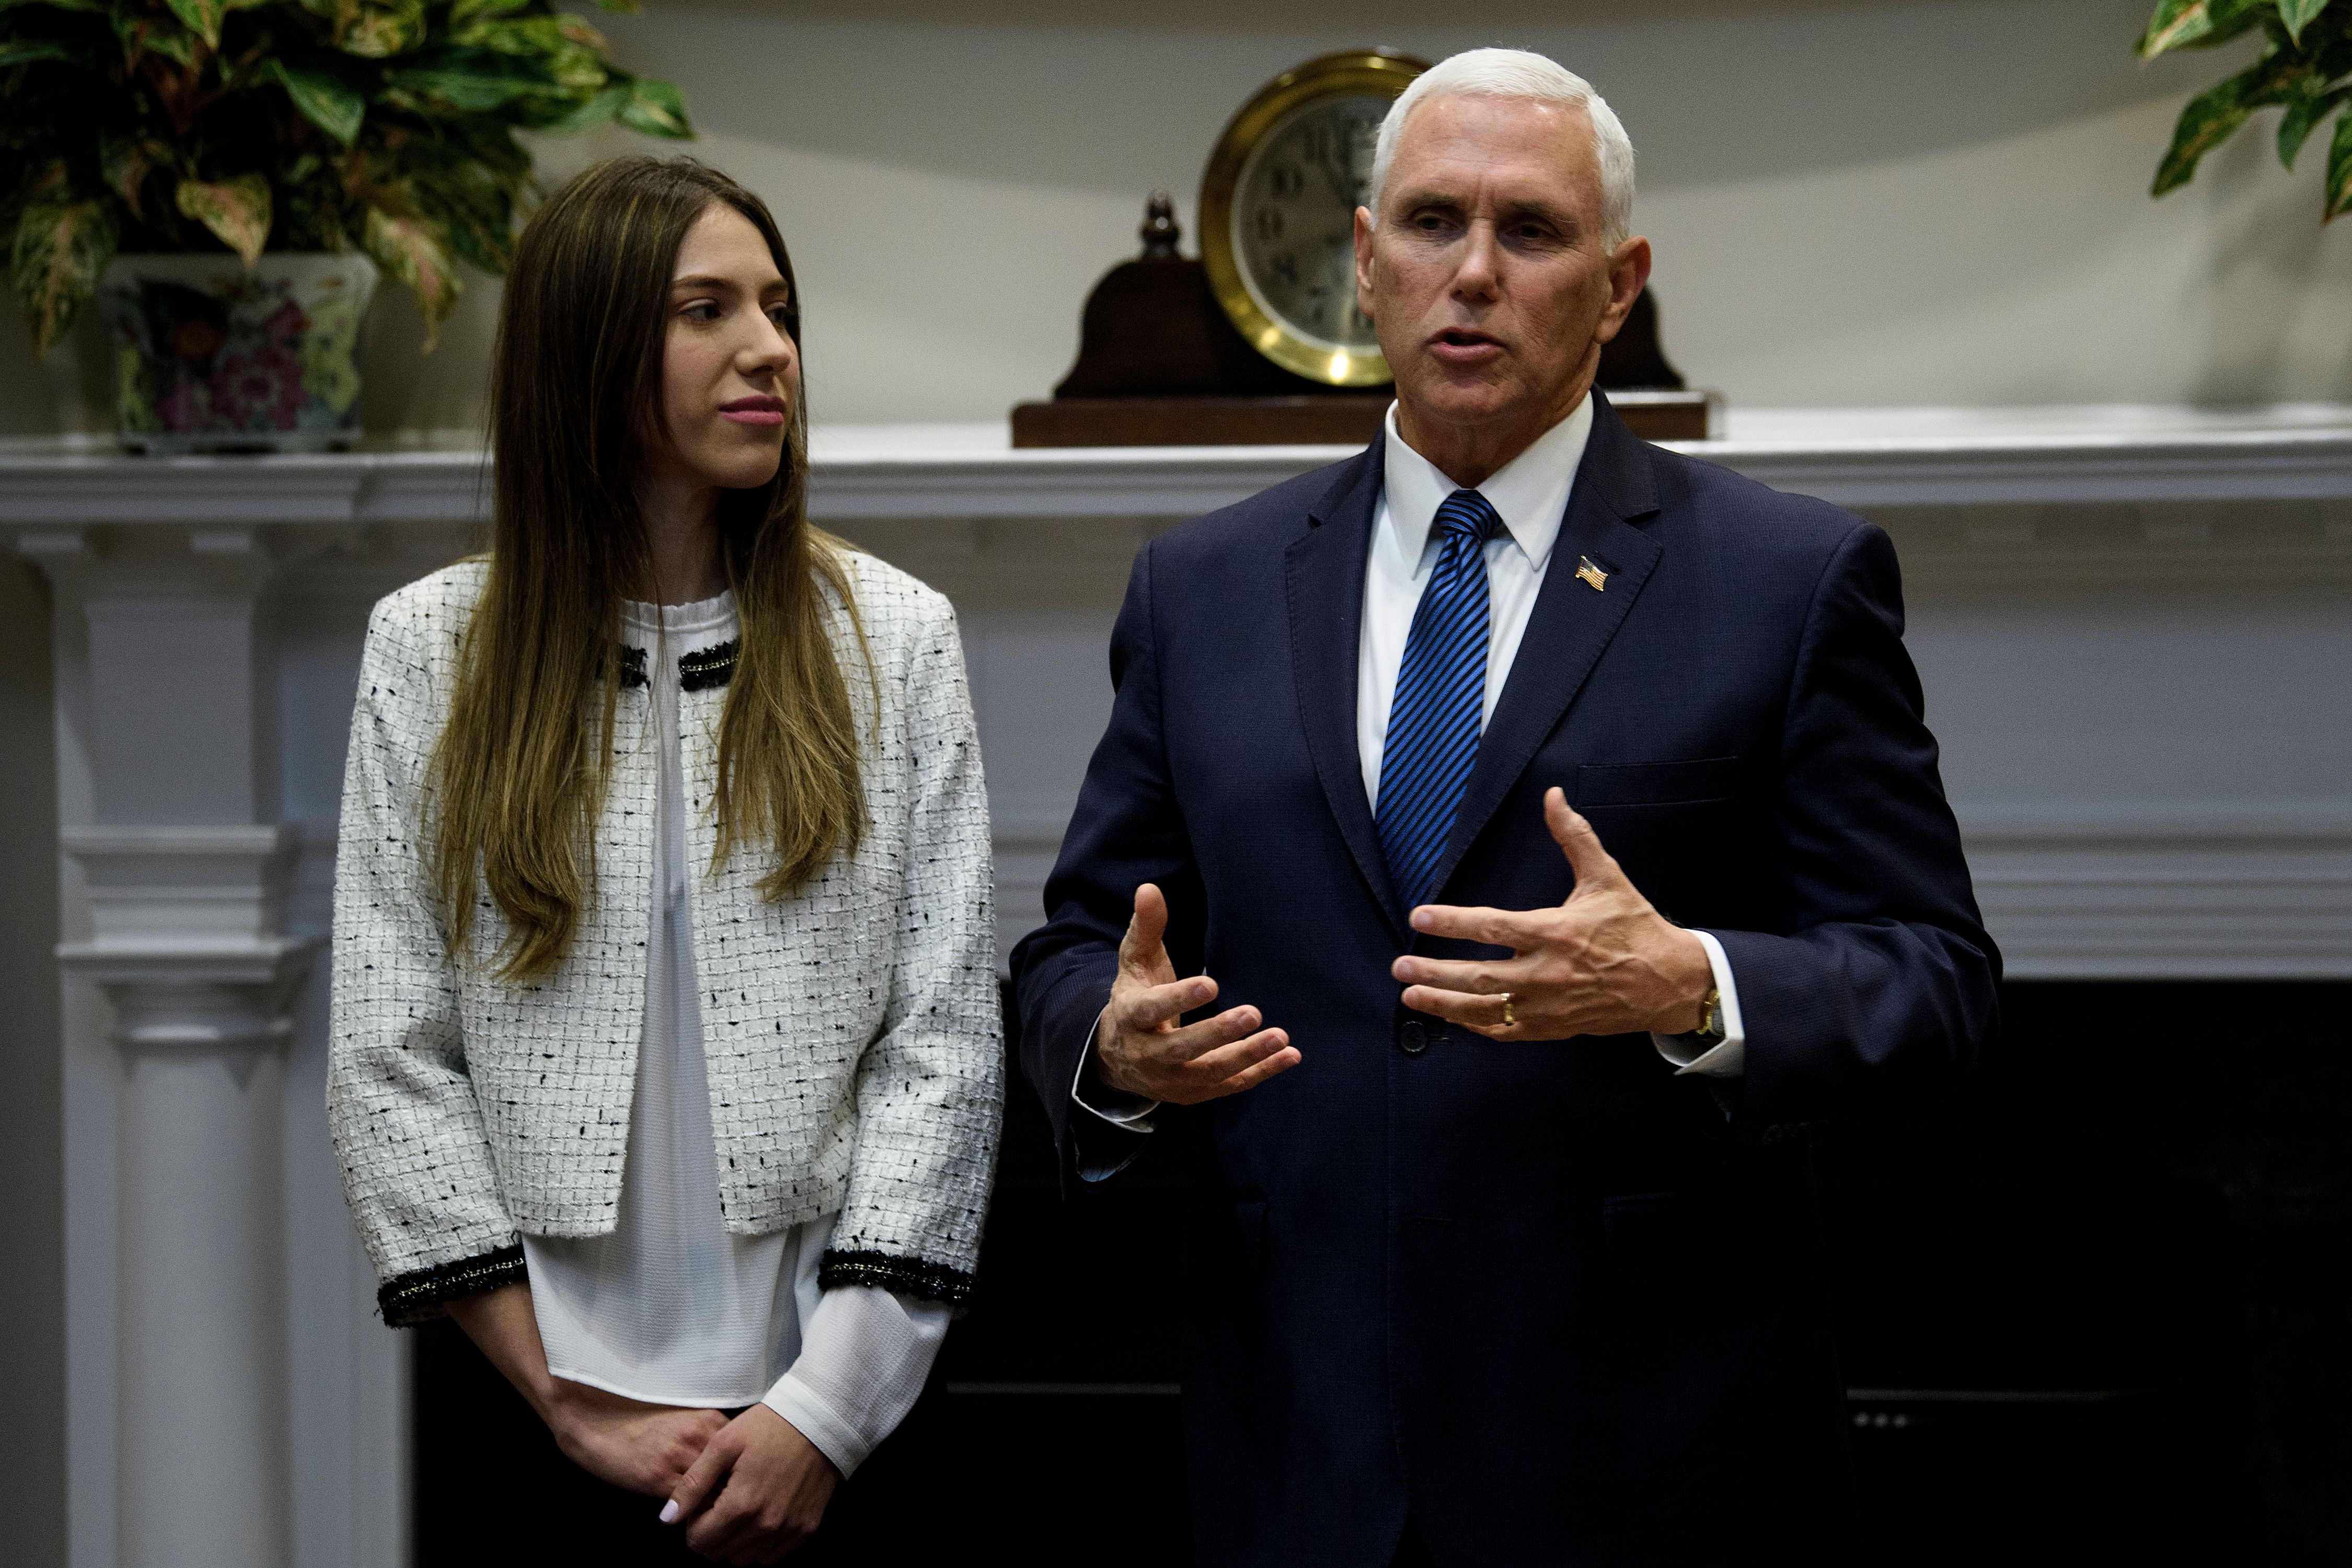 Fabiana Rosales de Guaido, wife of Venezuela's self-proclaimed interim president Juan Guaido, listens as US Vice President Mike Pence speaks before a meeting at the White House March 27, 2019, in Washington, DC. (BRENDAN SMIALOWSKI/AFP/Getty Images)